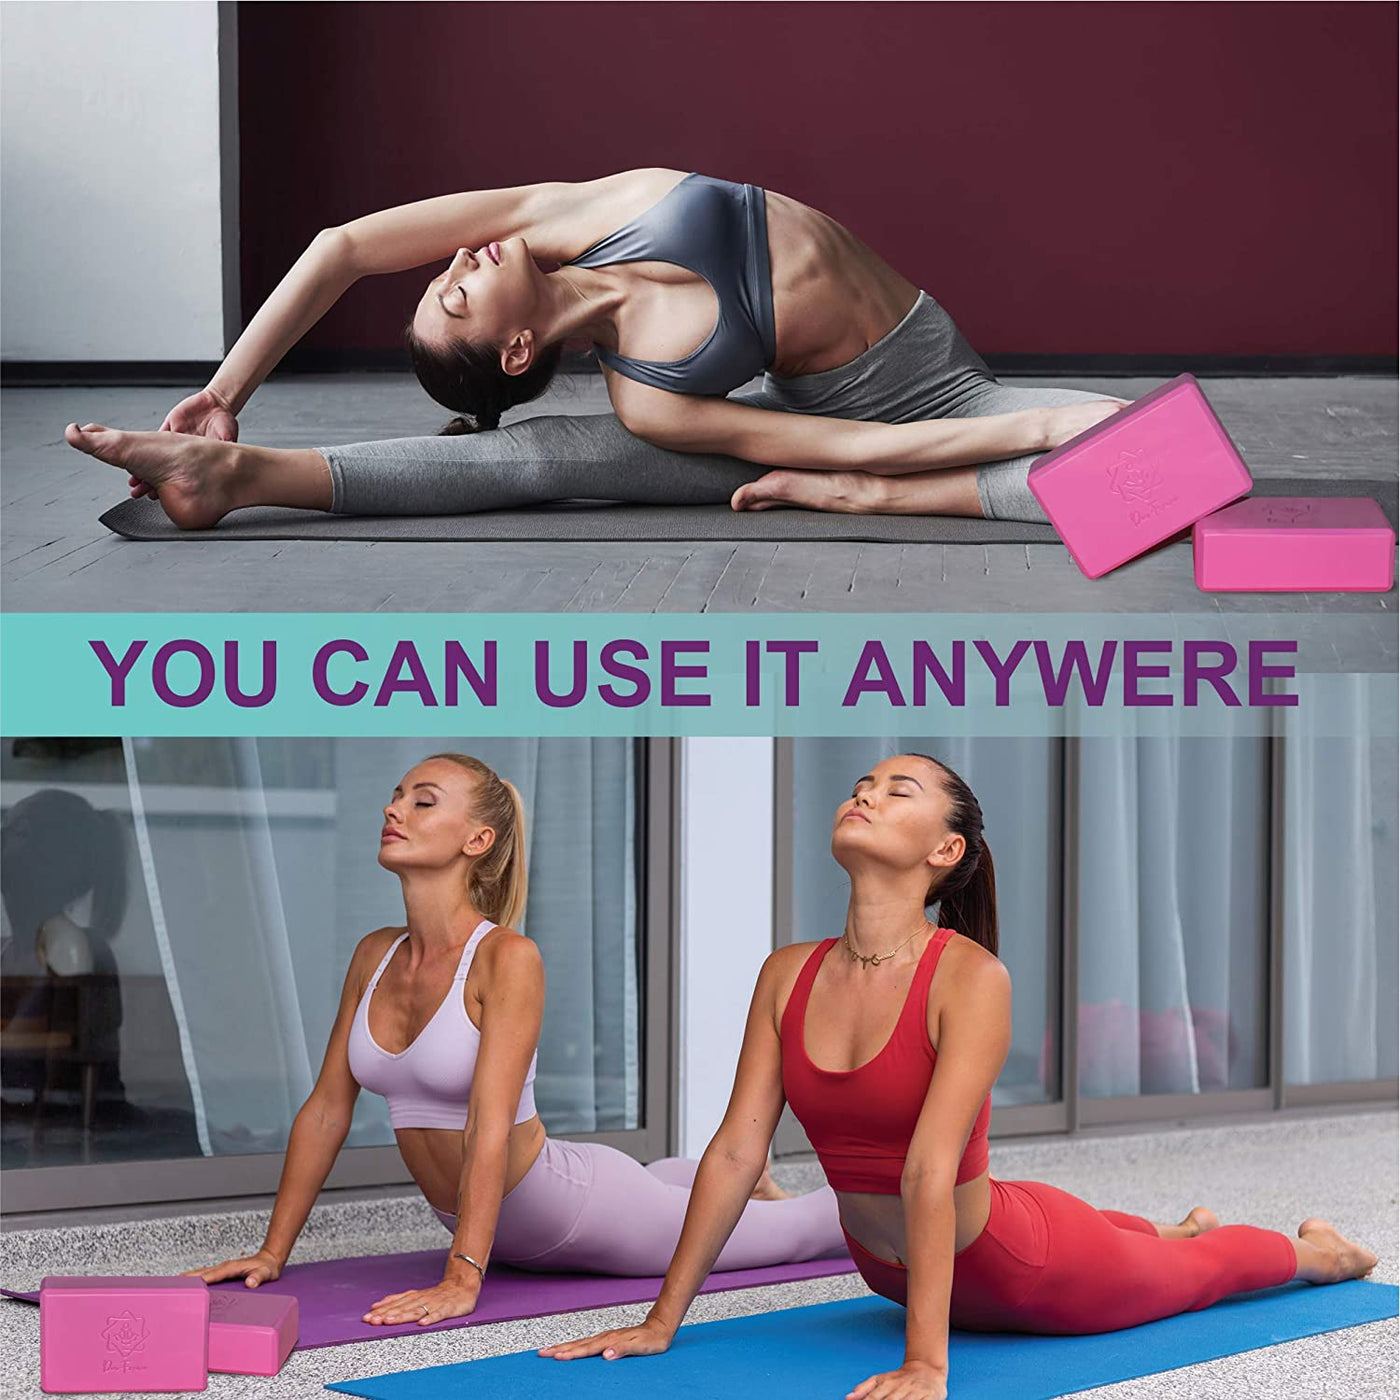 Dea Forever Yoga Blocks with Strap Set | High-Density Eva Foam Blocks with Yoga Strap D Ring Yoga Set with Bag | Yoga Brick 2 Pack and Strap + eBook for a Better Lifestyle